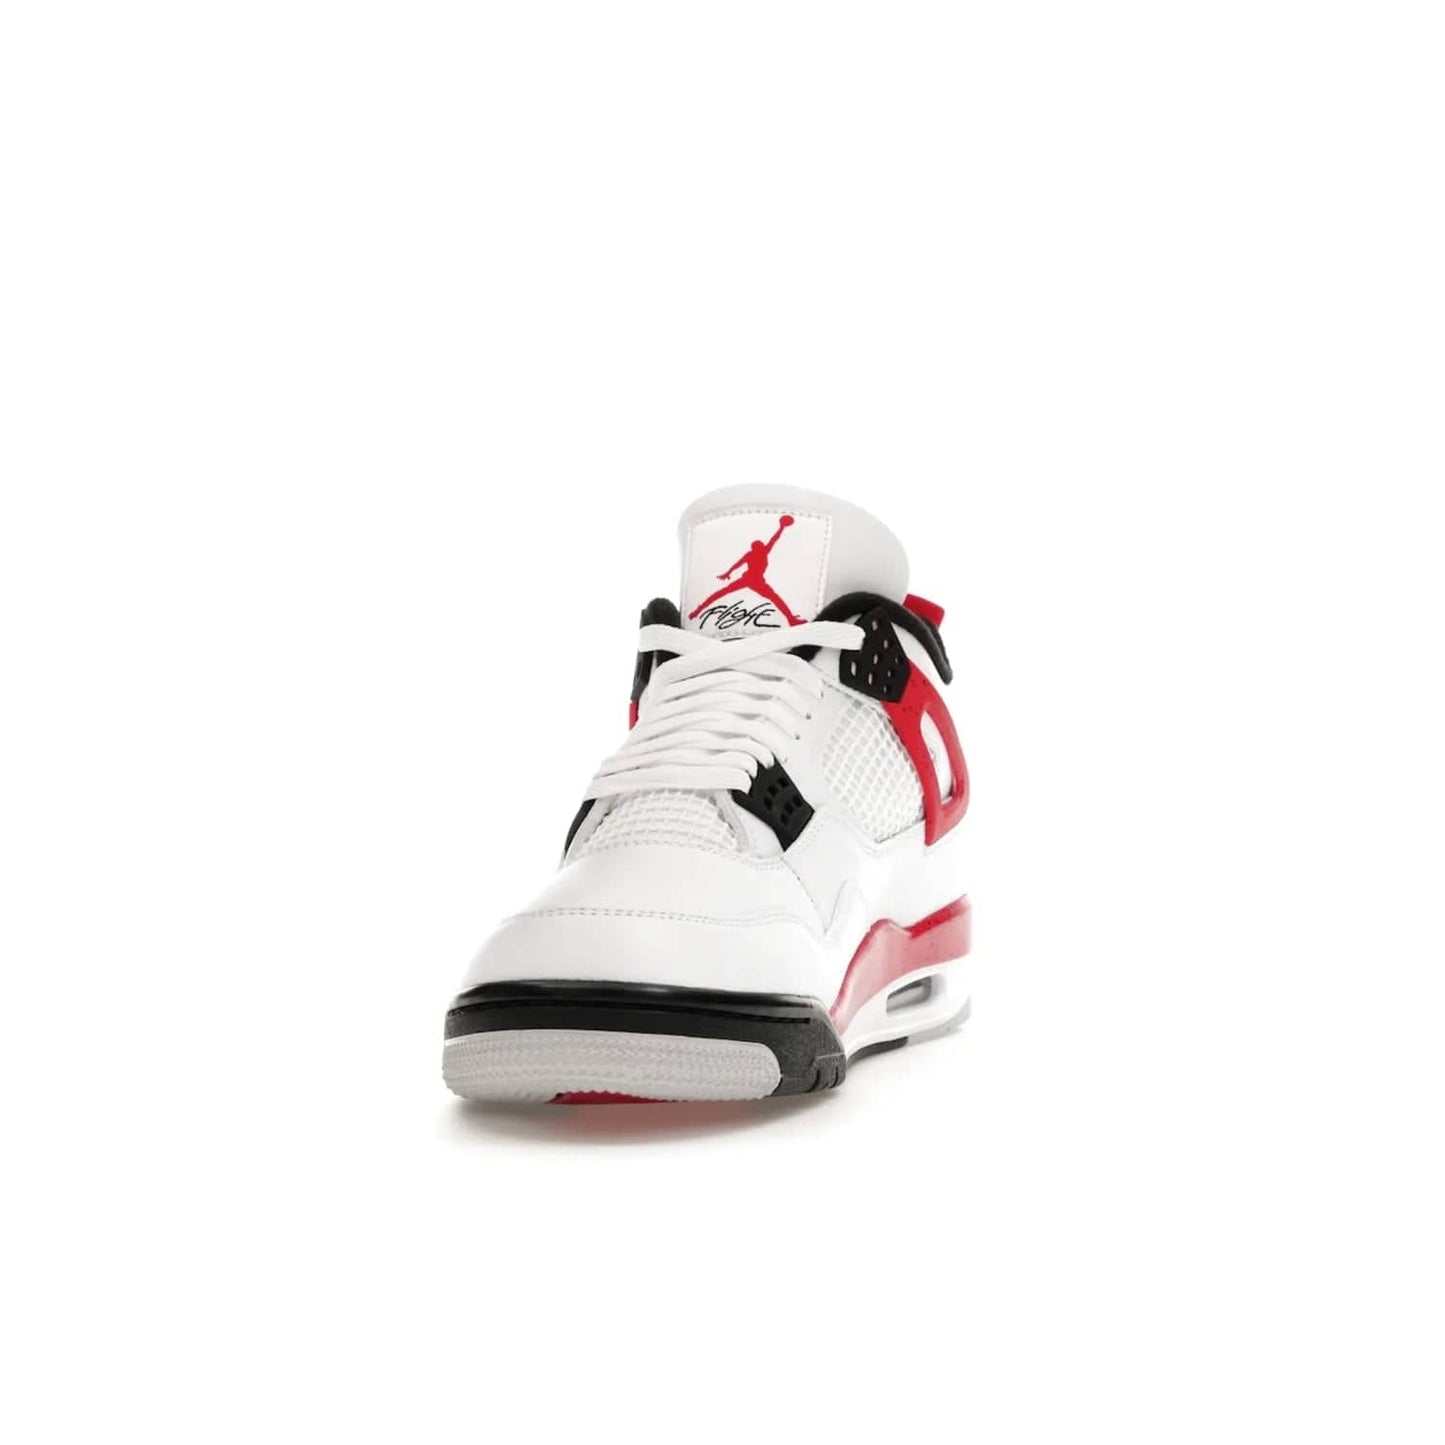 Jordan 4 Retro Red Cement - Image 12 - Only at www.BallersClubKickz.com - Iconic Jordan silhouette with a unique twist. White premium leather uppers with fire red and black detailing. Black, white, and fire red midsole with mesh detailing and Jumpman logo. Jordan 4 Retro Red Cement released with premium price.